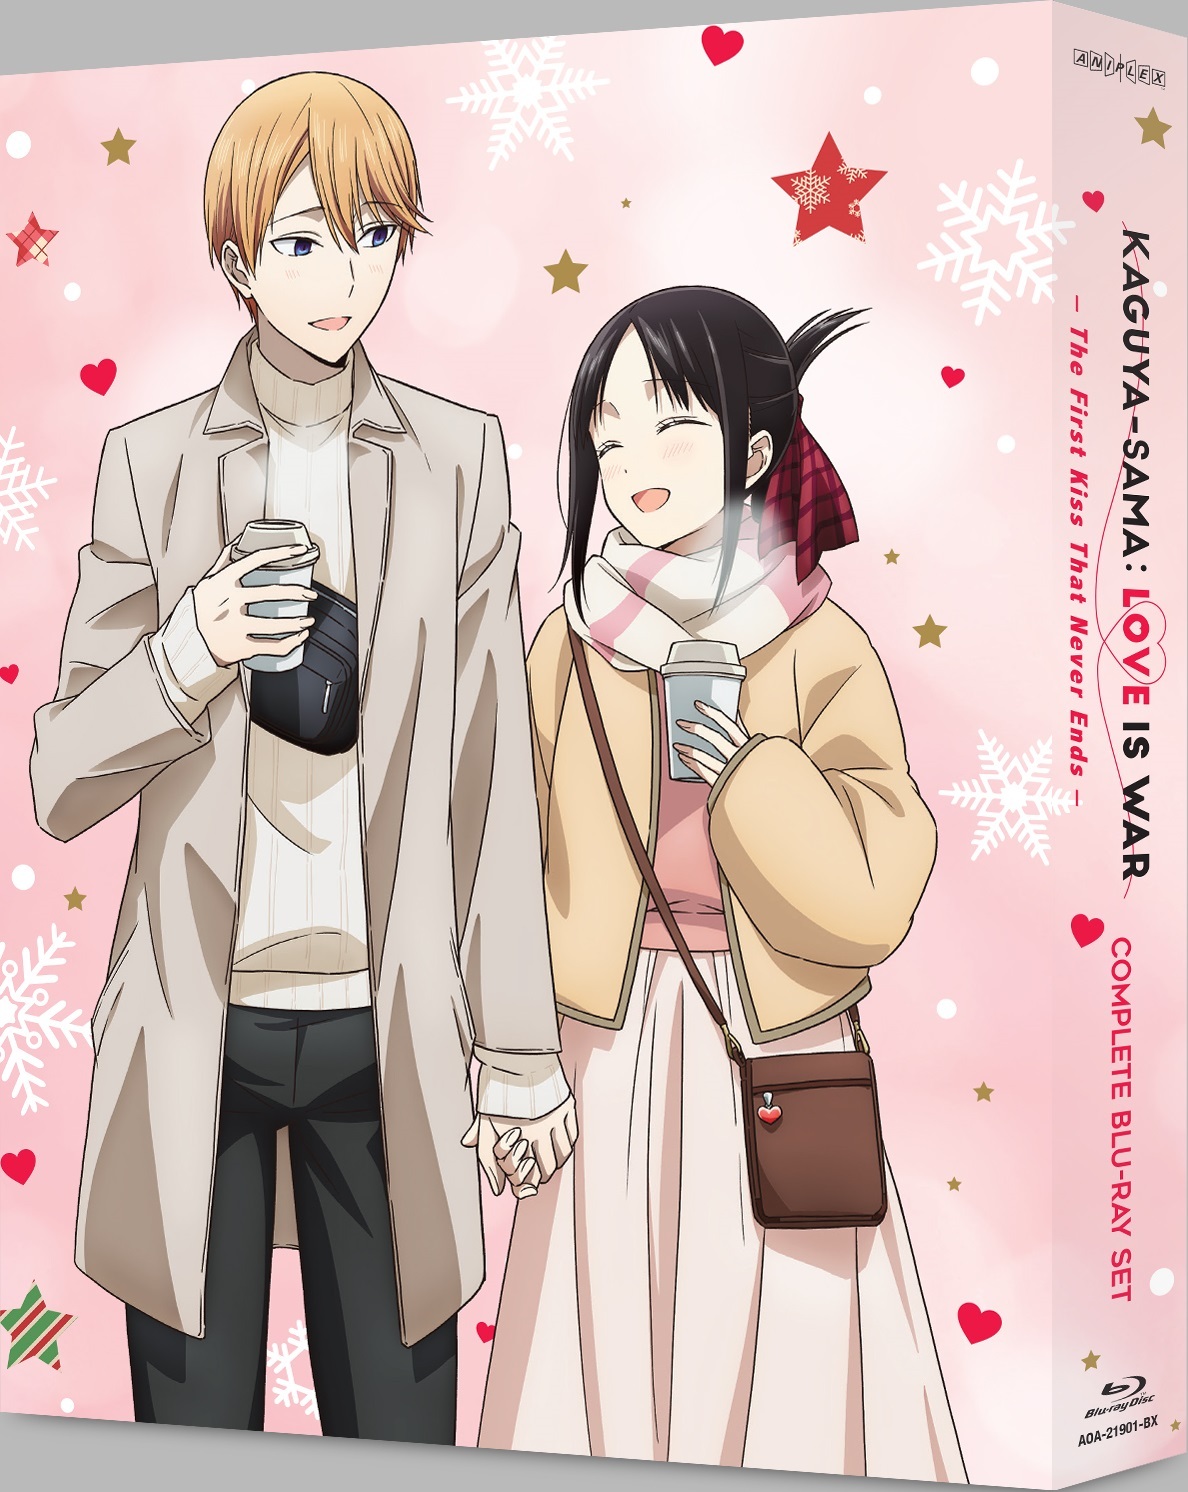 Kaguya-sama: Love is War The First Kiss That Never Ends Movie